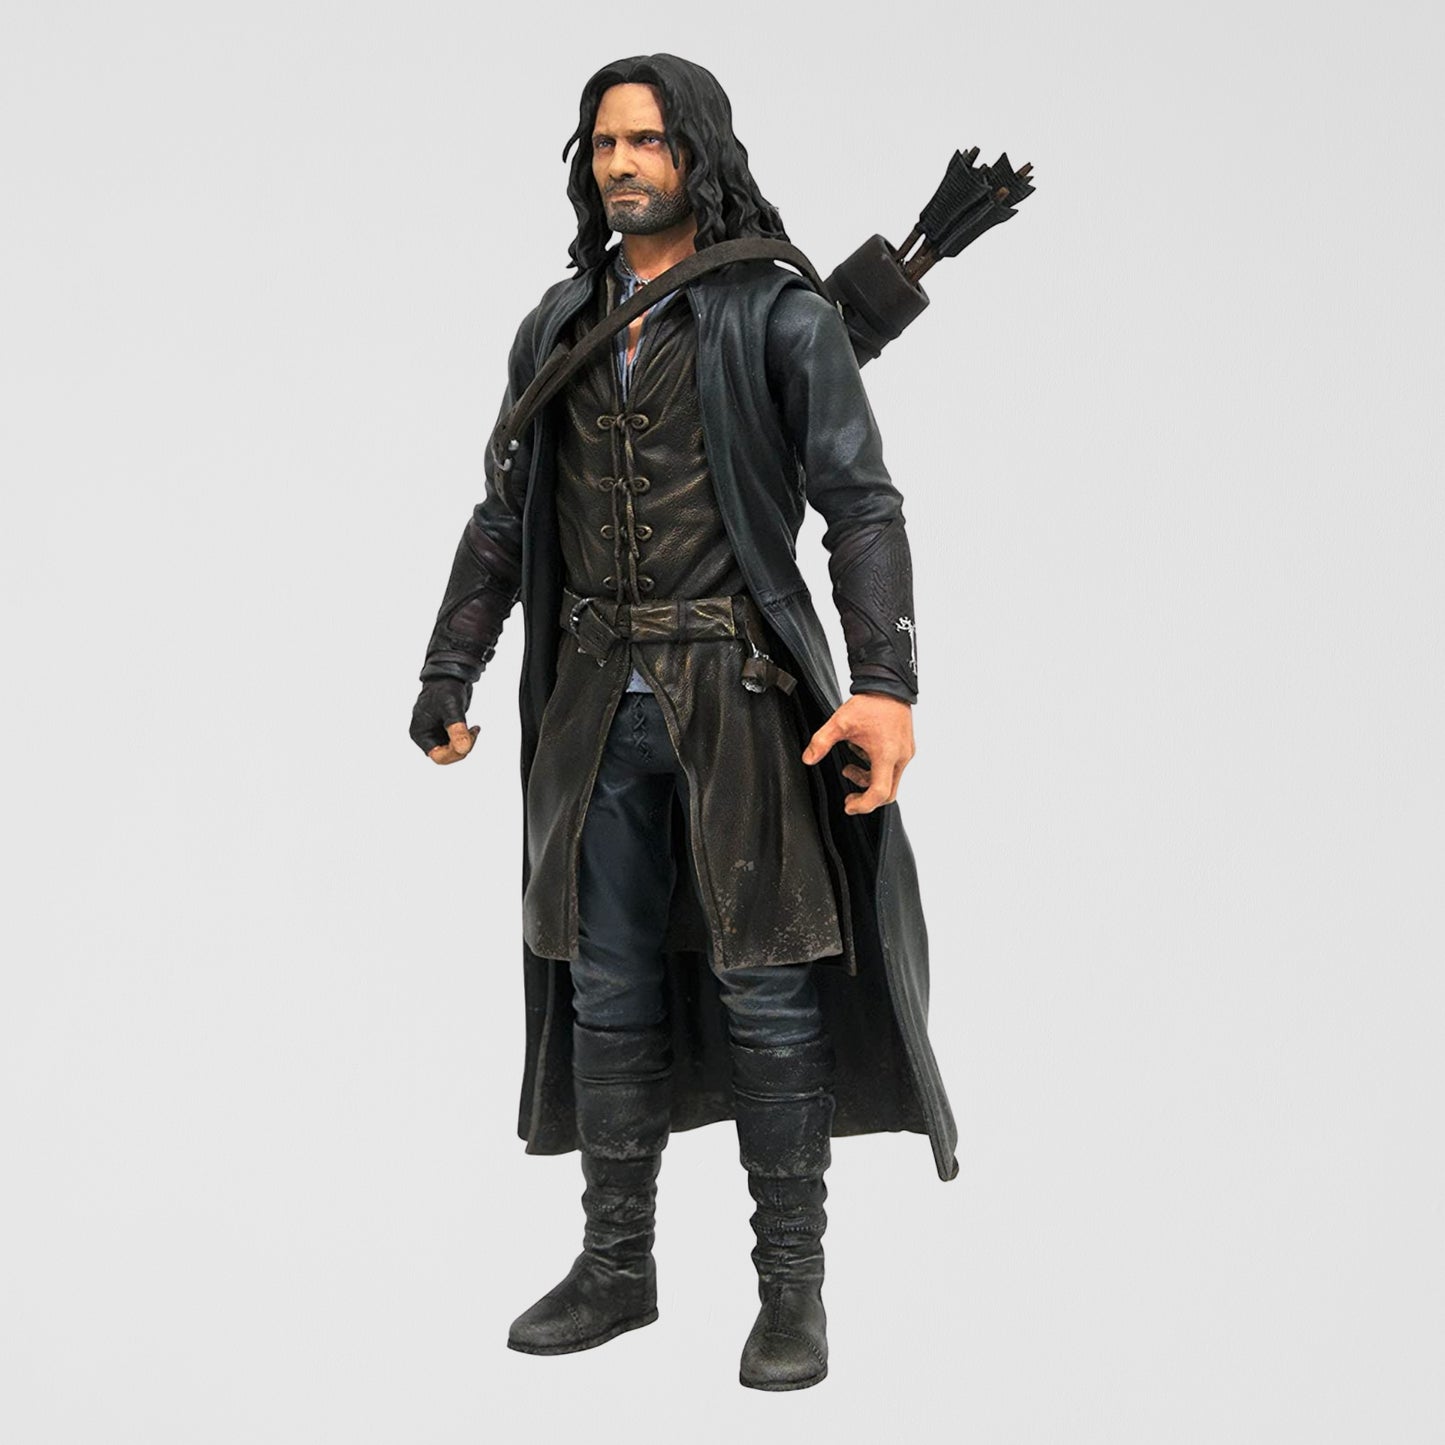 Aragorn (Lord of the Rings: The Fellowship of the Ring) Deluxe Action Figure